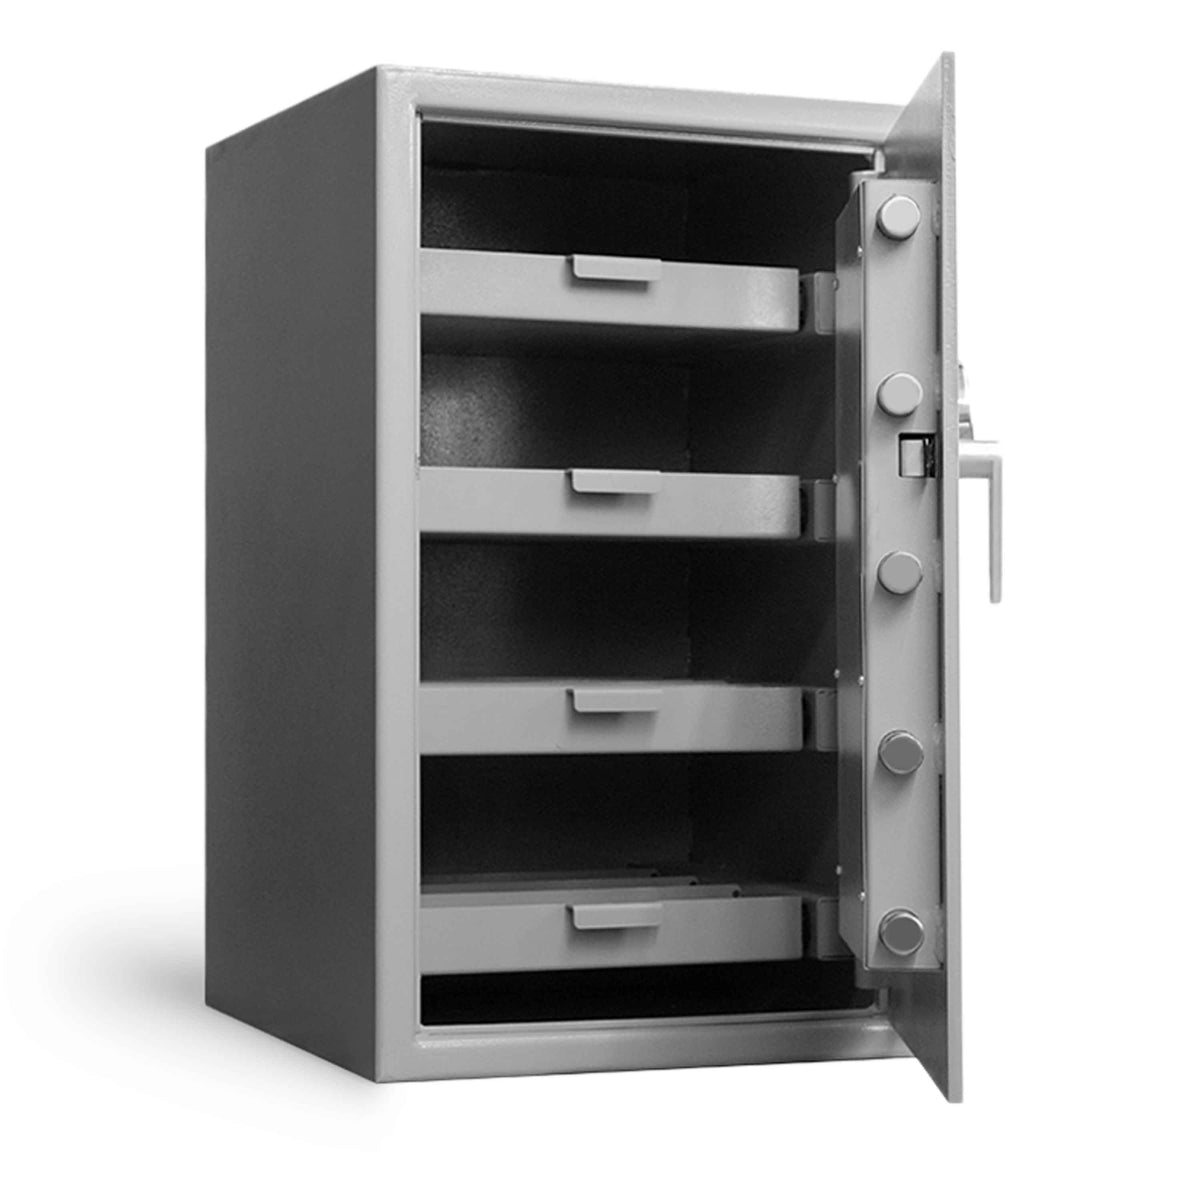 Pacific Safe B-HDPH352222-SR1 Heavy Duty Pharmacy Safe Door Open with Drawers